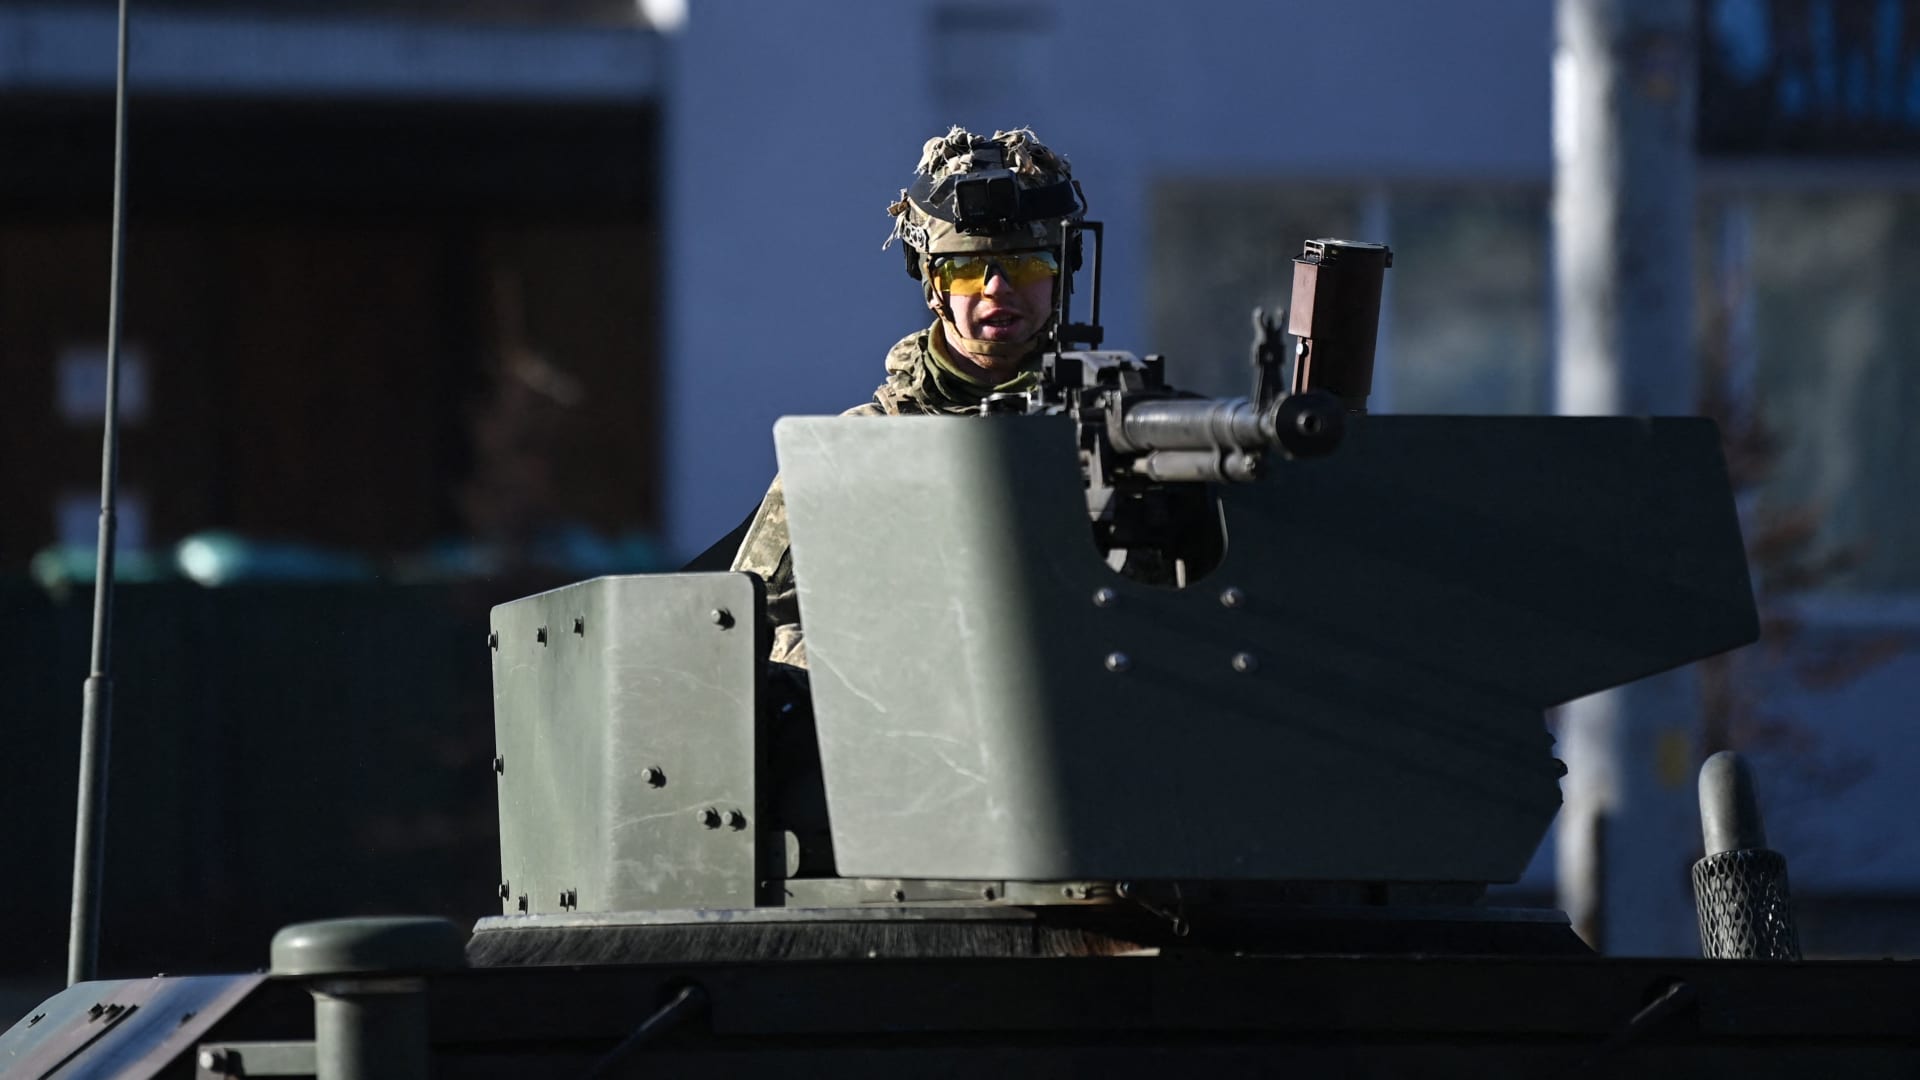 A Ukrainian soldier in an armoured vehicle waits on the west side of the Ukrainian capital of Kyiv on February 26, 2022.